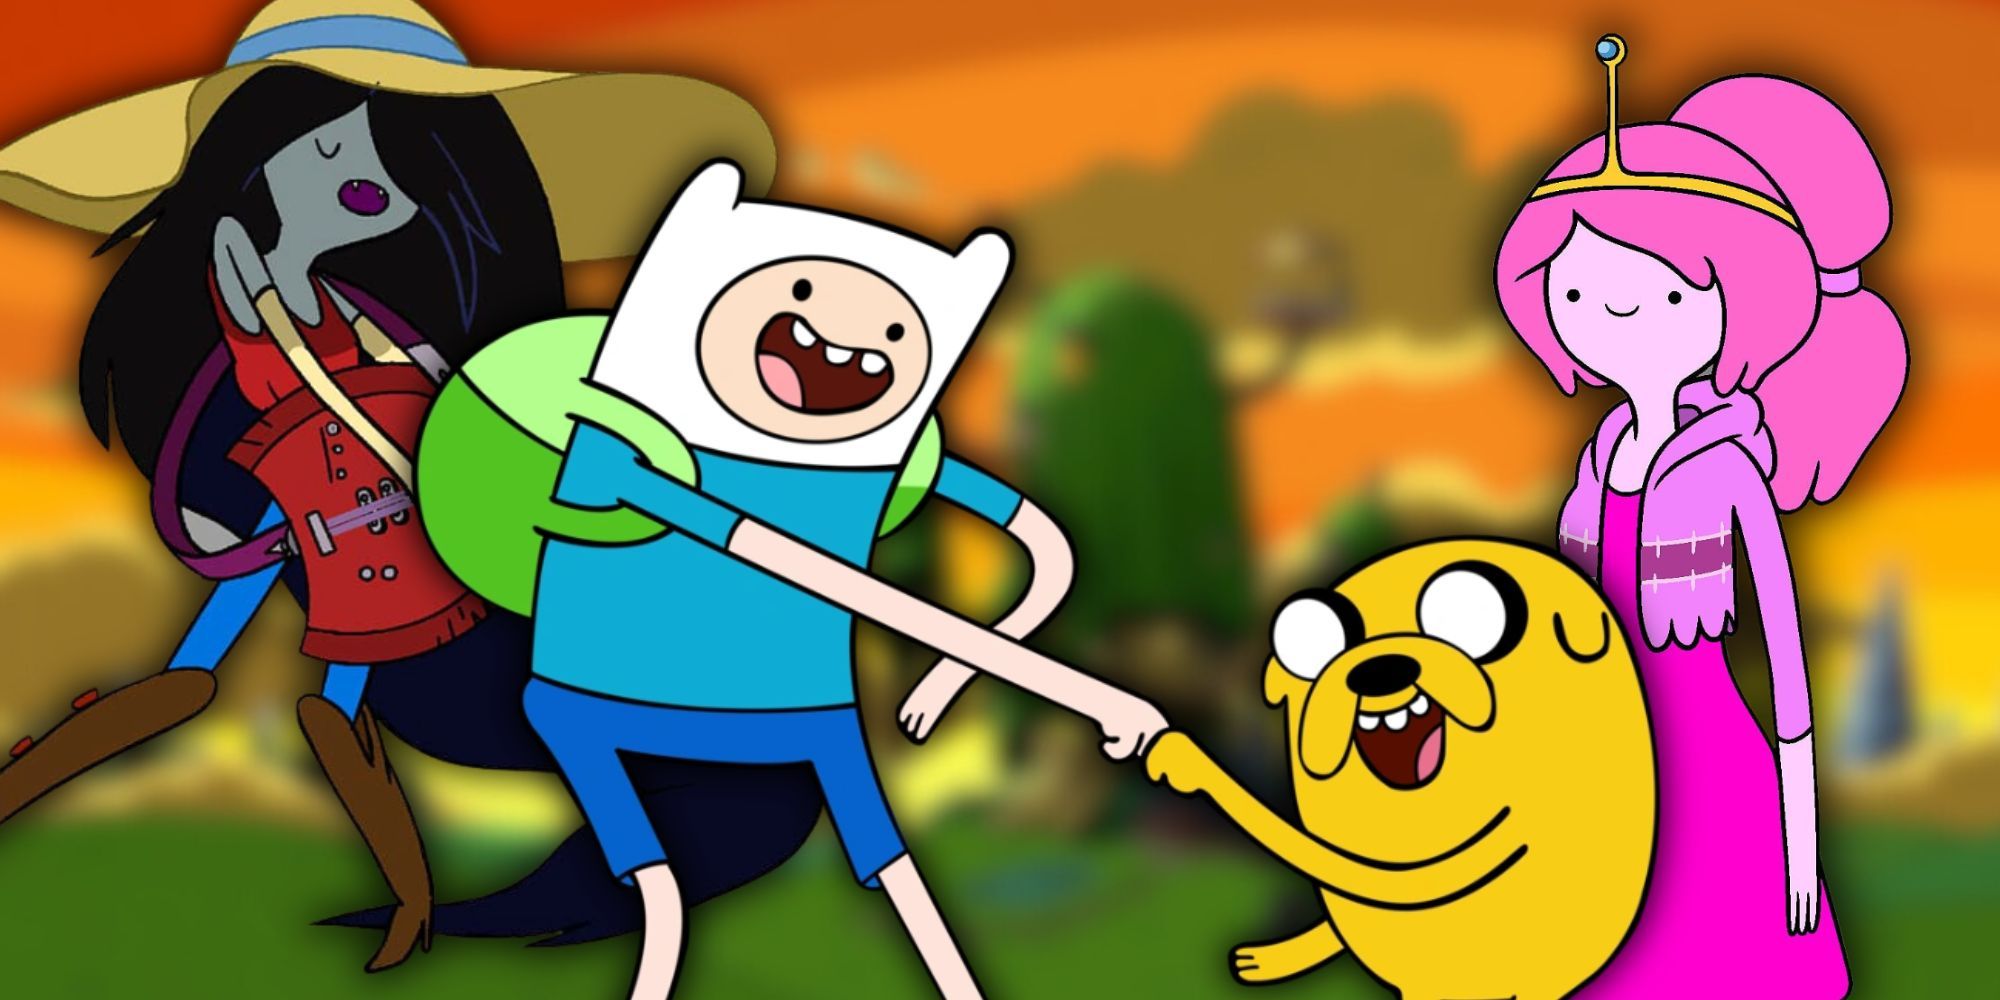 Adventure Time collage featuring PB, Marceline, Jake and Finn